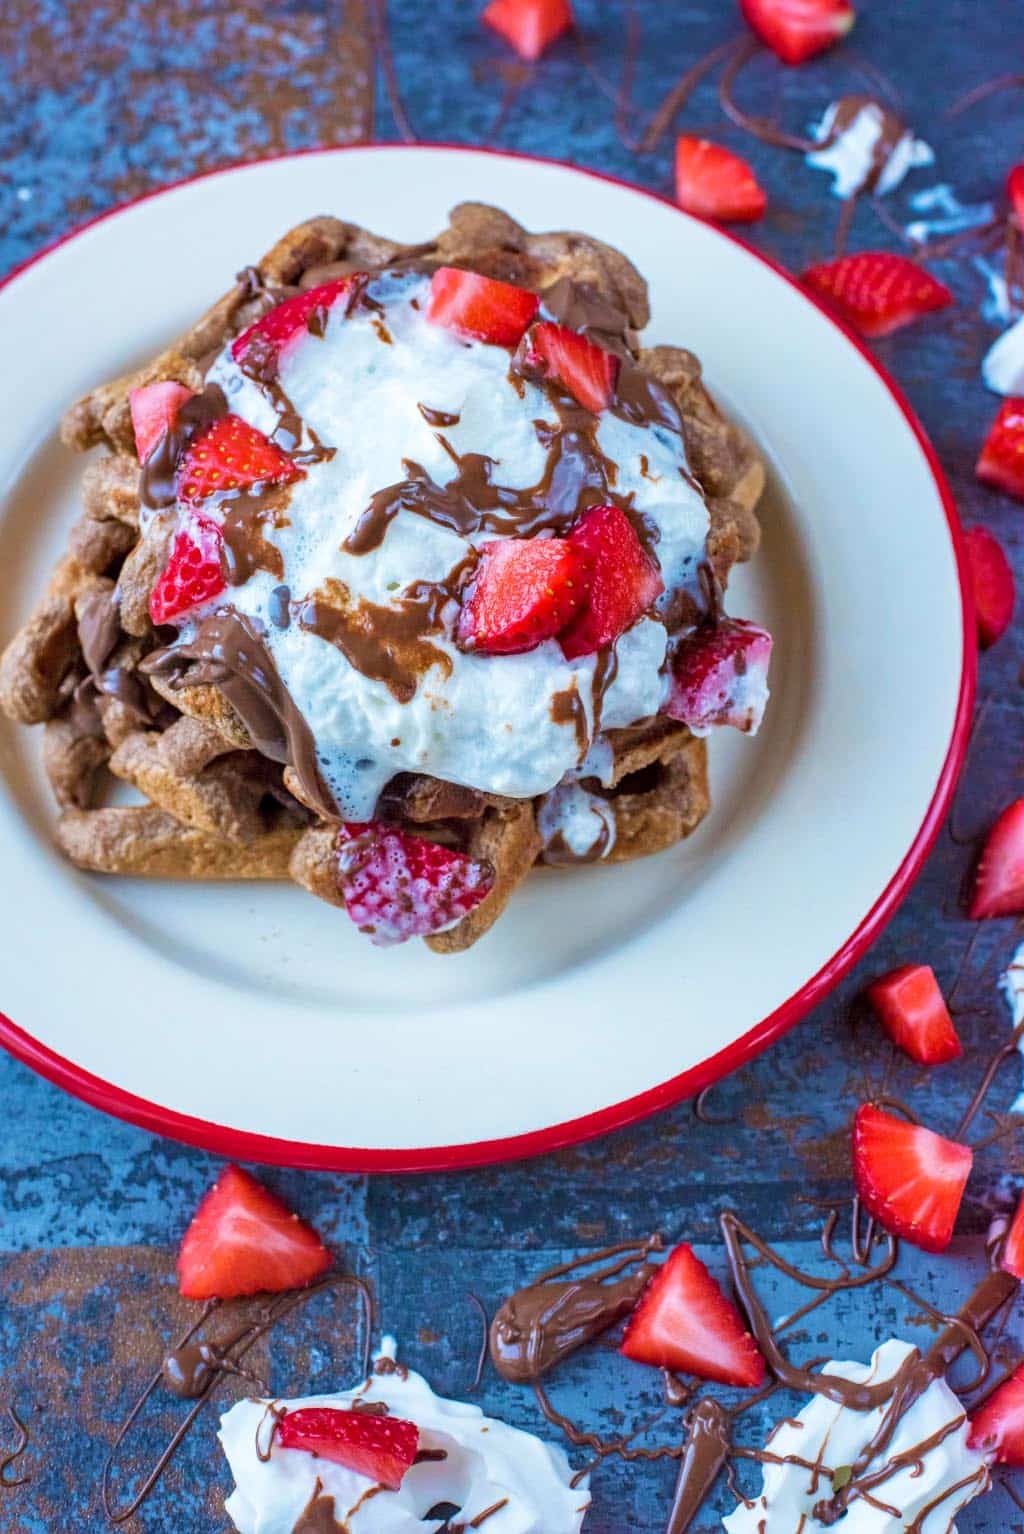 Waffles, cream and strawberries on a plate surrounded by more strawberries and chocolate sauce.